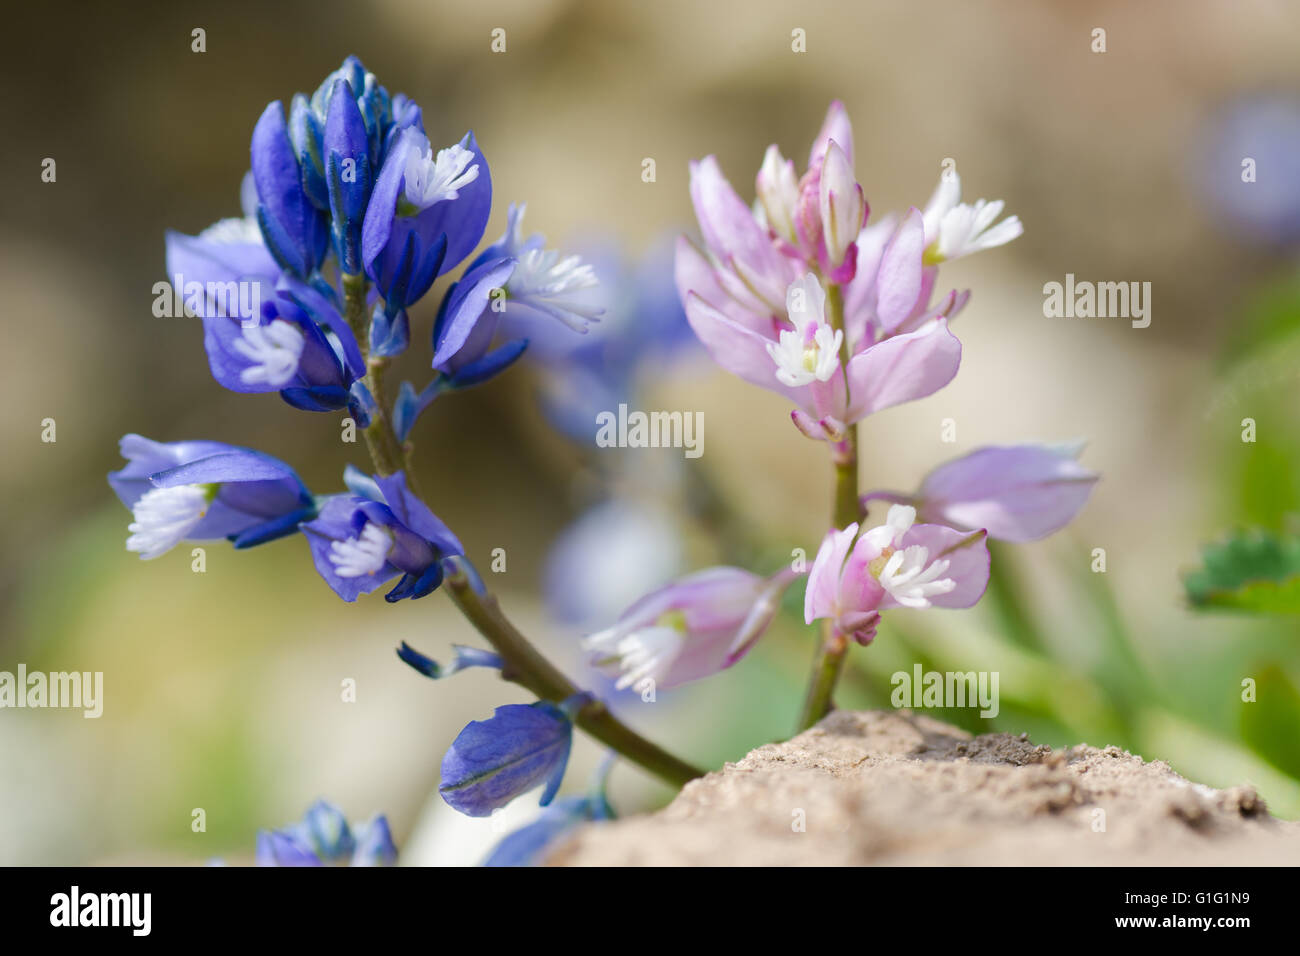 Common milkwort (Polygala vulgaris) blue and pink flowers. Two colour forms of flowers of plant in the family Polygalaceae Stock Photo